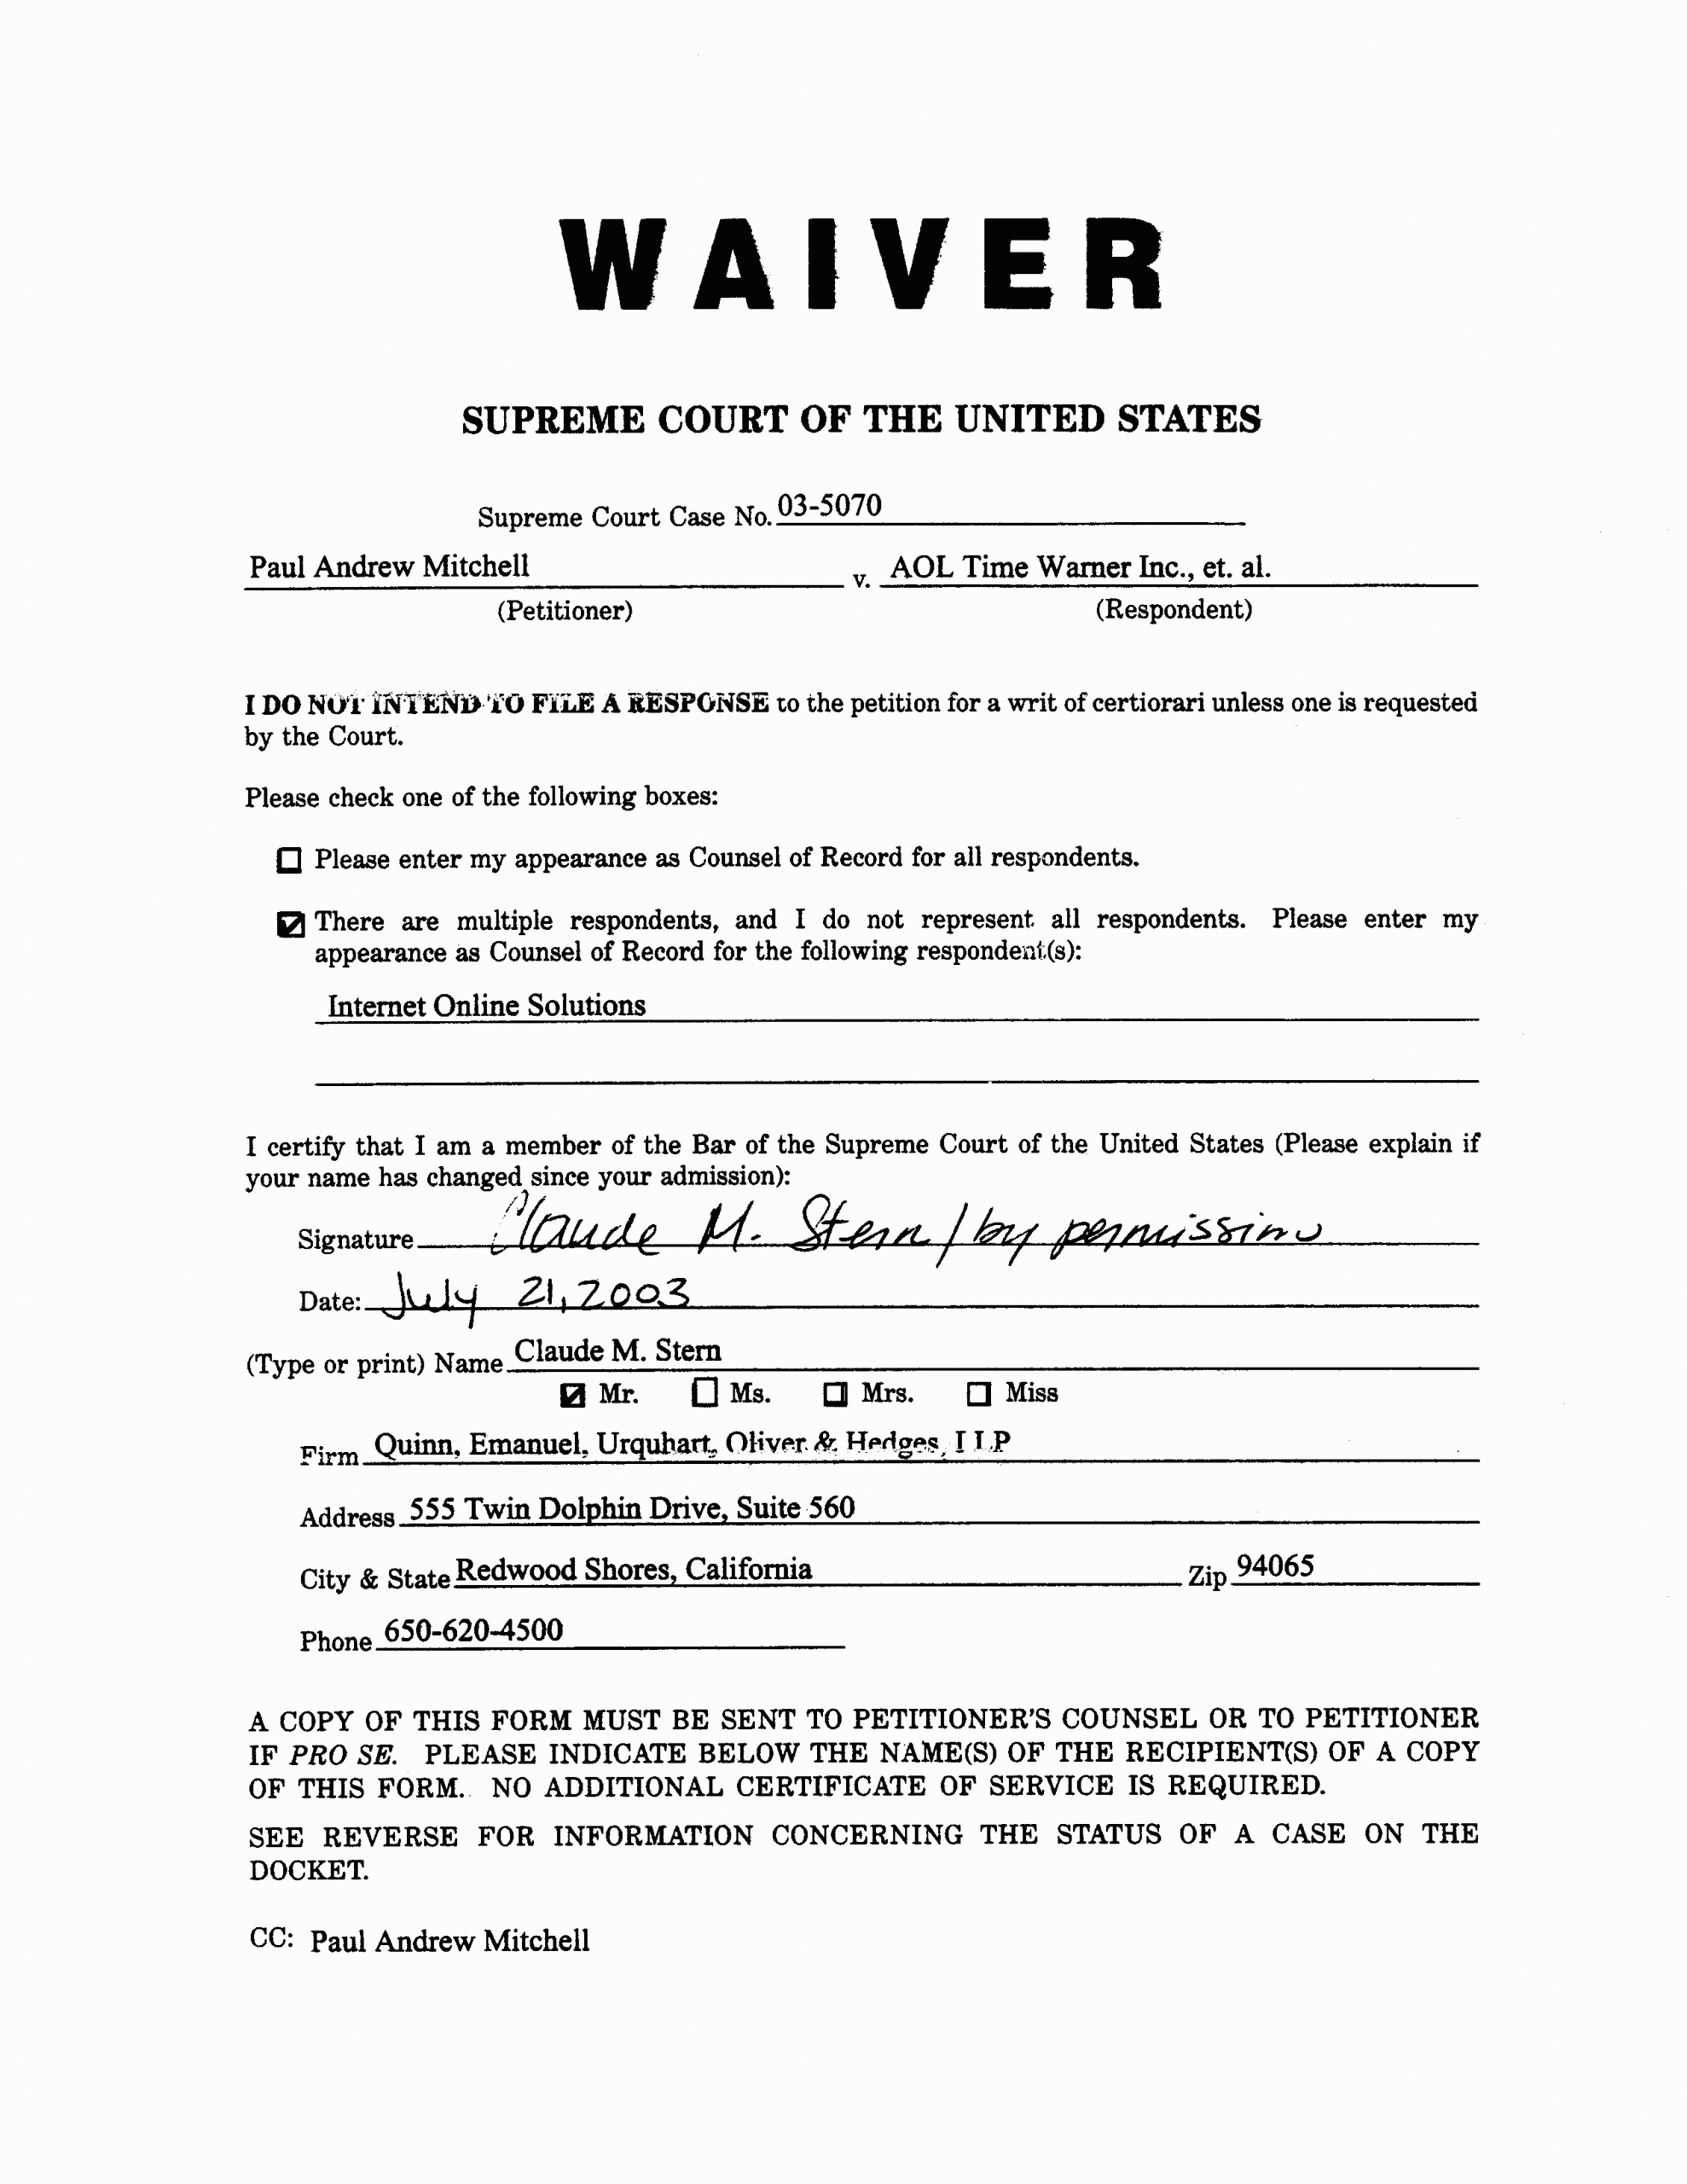 Waiver form Template for Sports Luxury Index Of Cc Aol Waiver 2003 07 21 2